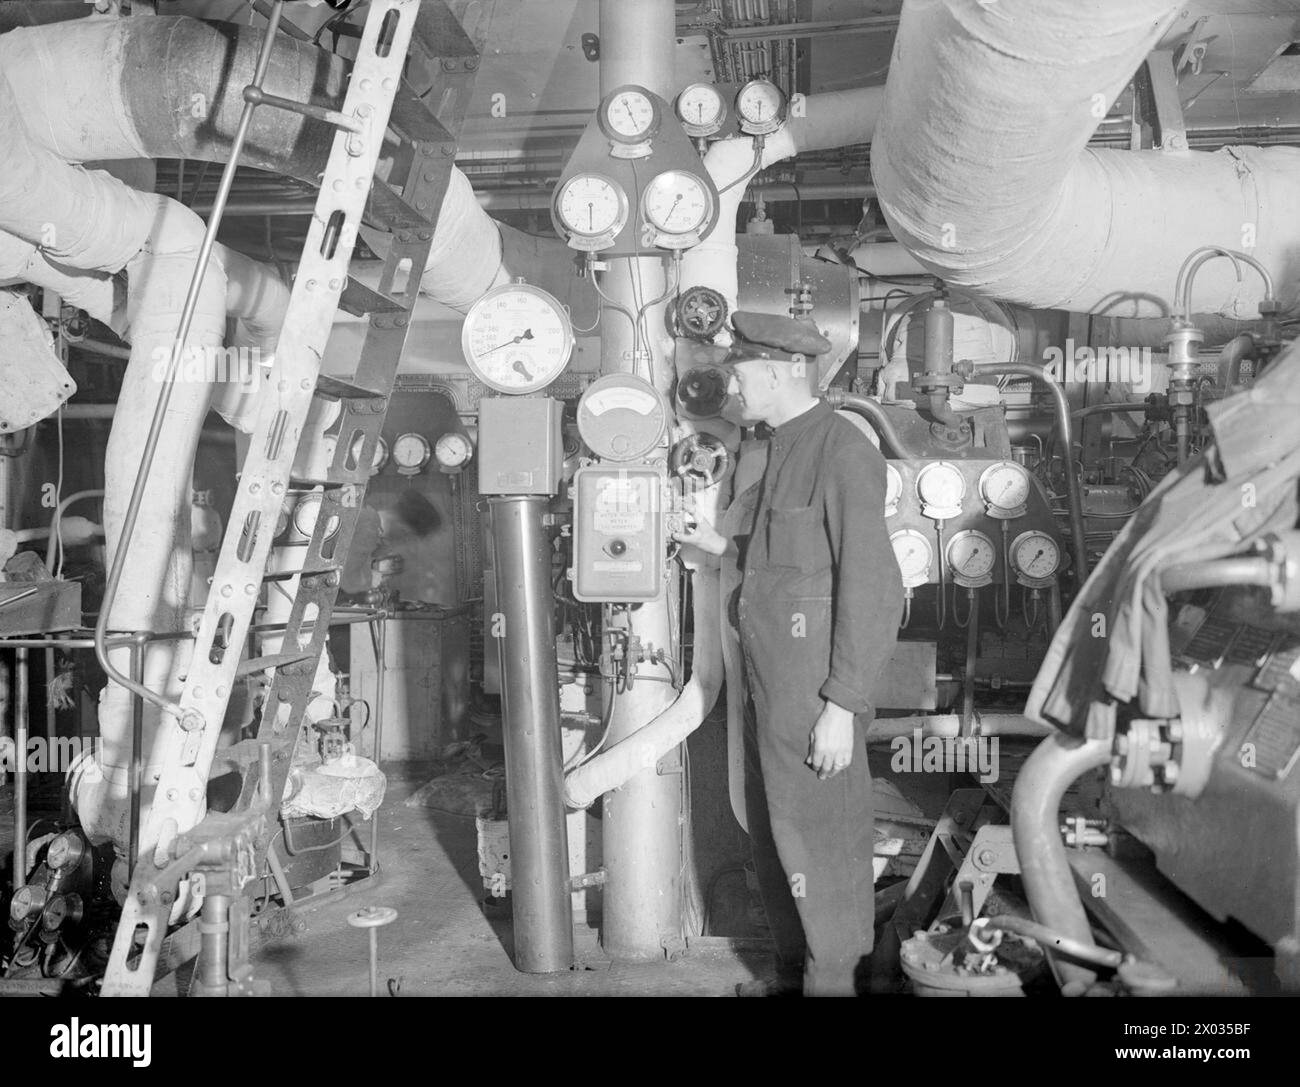 A CRUISER'S EQUIPMENT. 26 AUGUST 1943, PORTSMOUTH. EQUIPMENT MADE BY EVERSHED AND VIGNOLES LTD FITTED ON BOARD THE CRUISER HMS JAMAICA. - Main engine salinometer Stock Photo